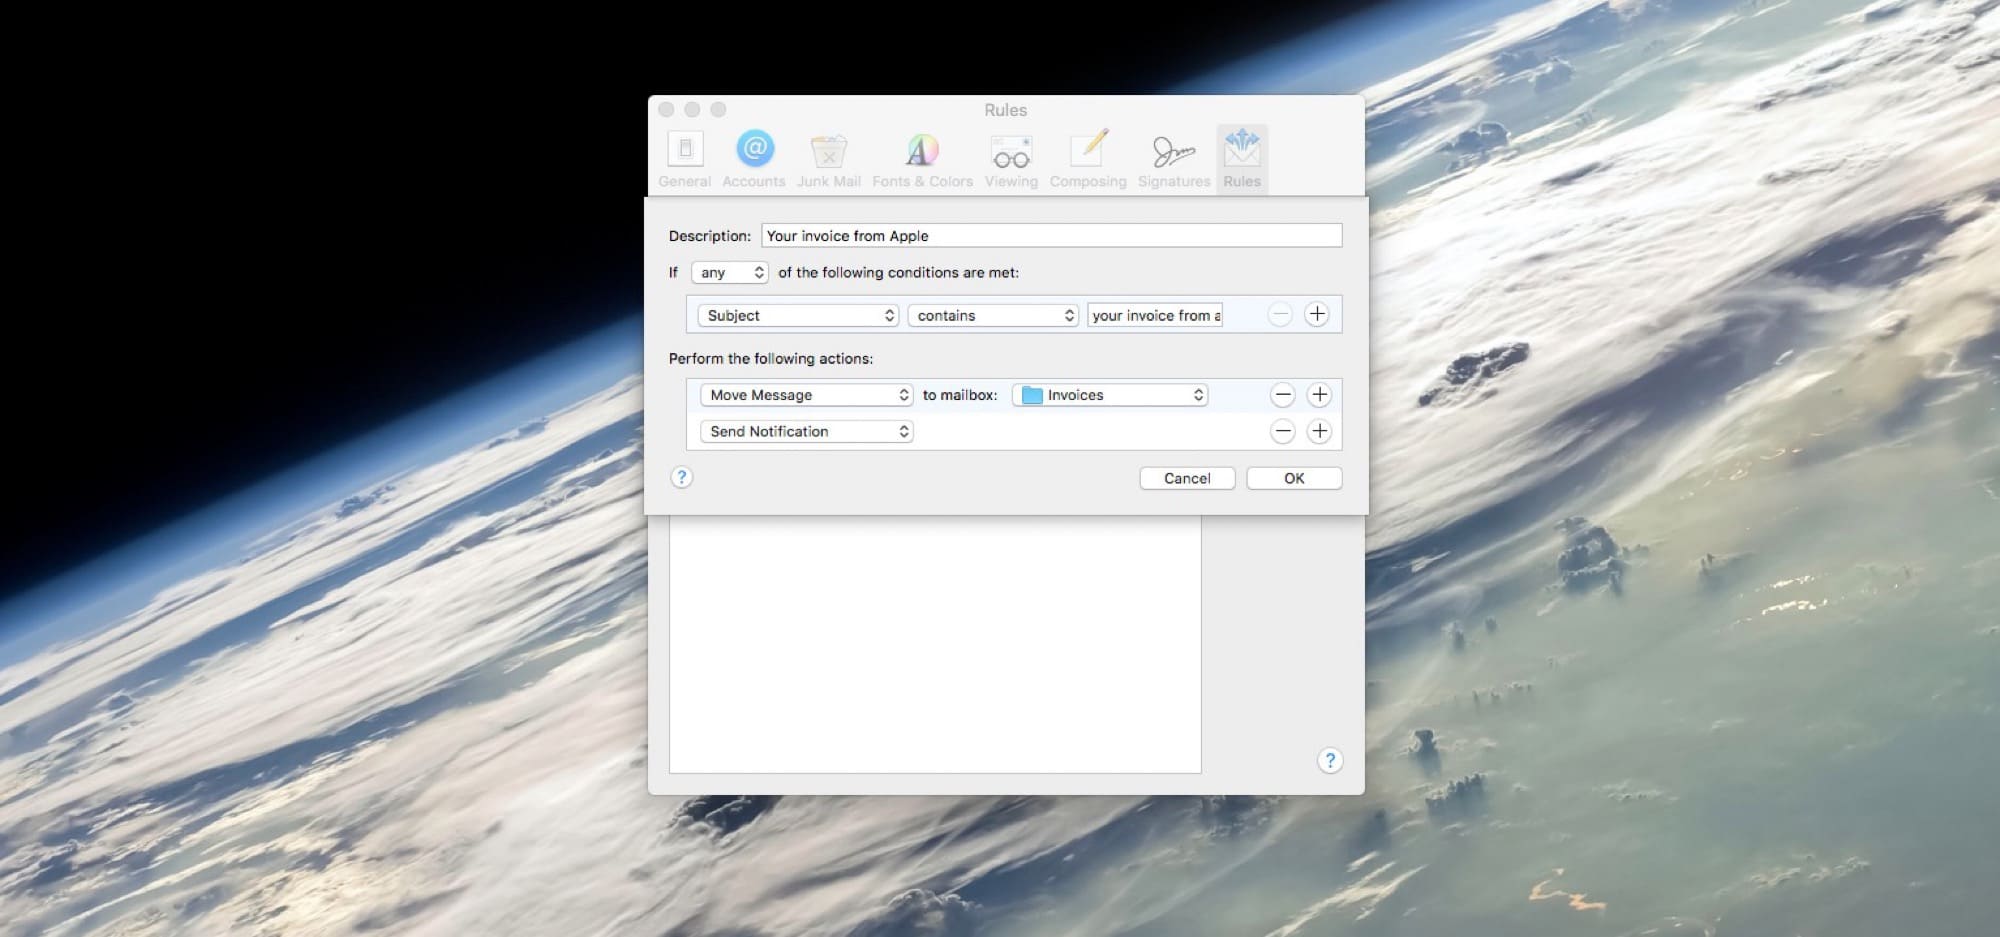 Automatic filing of your App Store invoices, with Mac Mail rules.